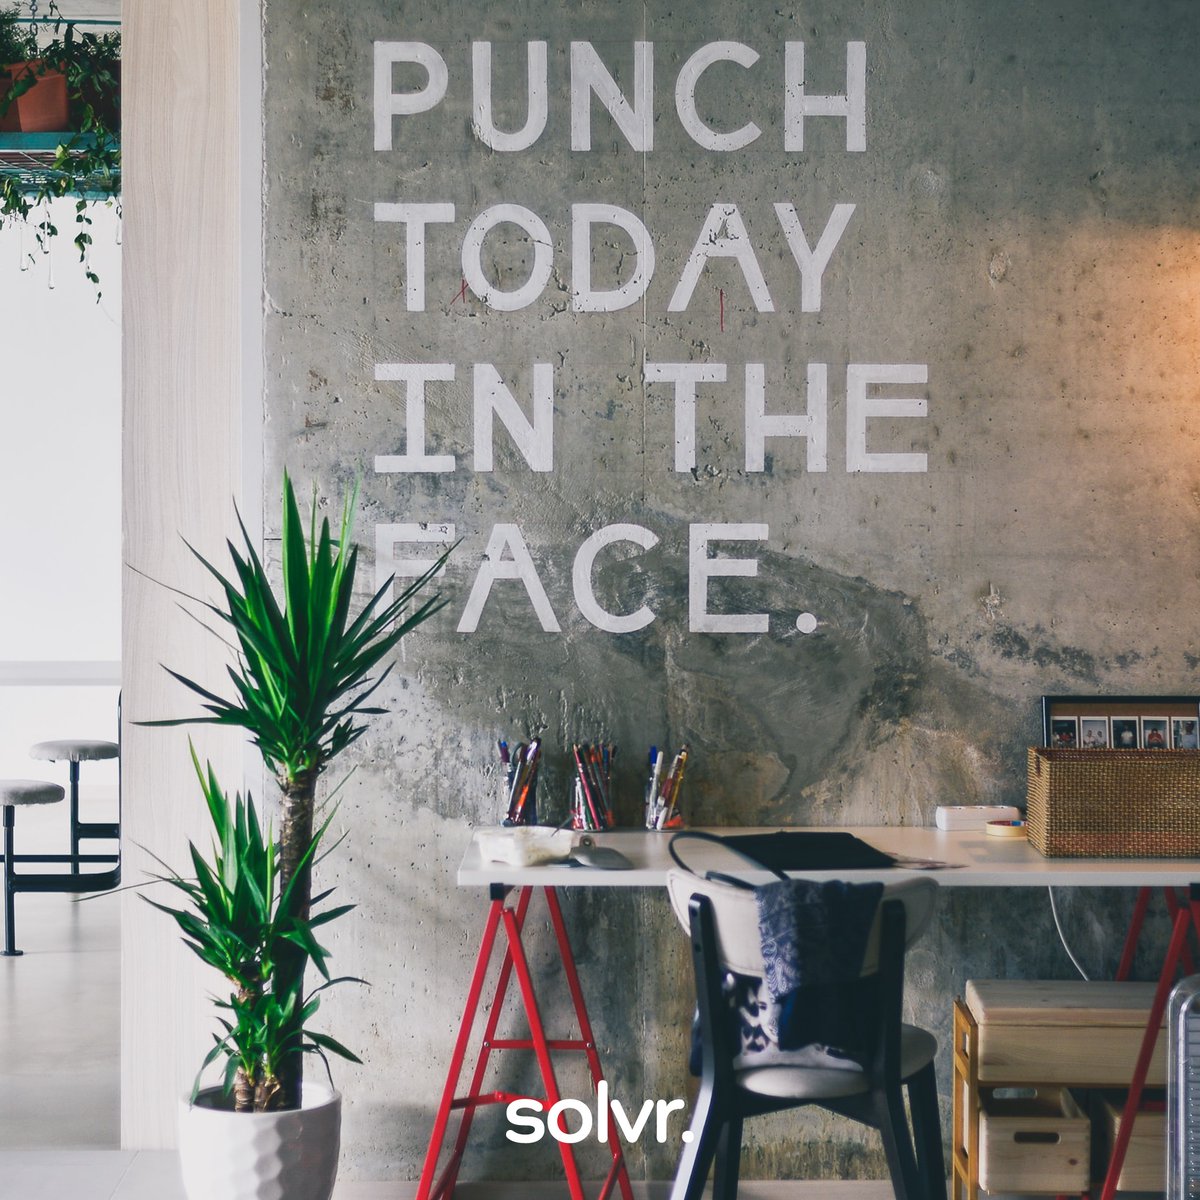 Reach the next level together with solvr. 🆙⭐️

#consideritdone #creativebusiness #virtualexperts #designforafixedprice